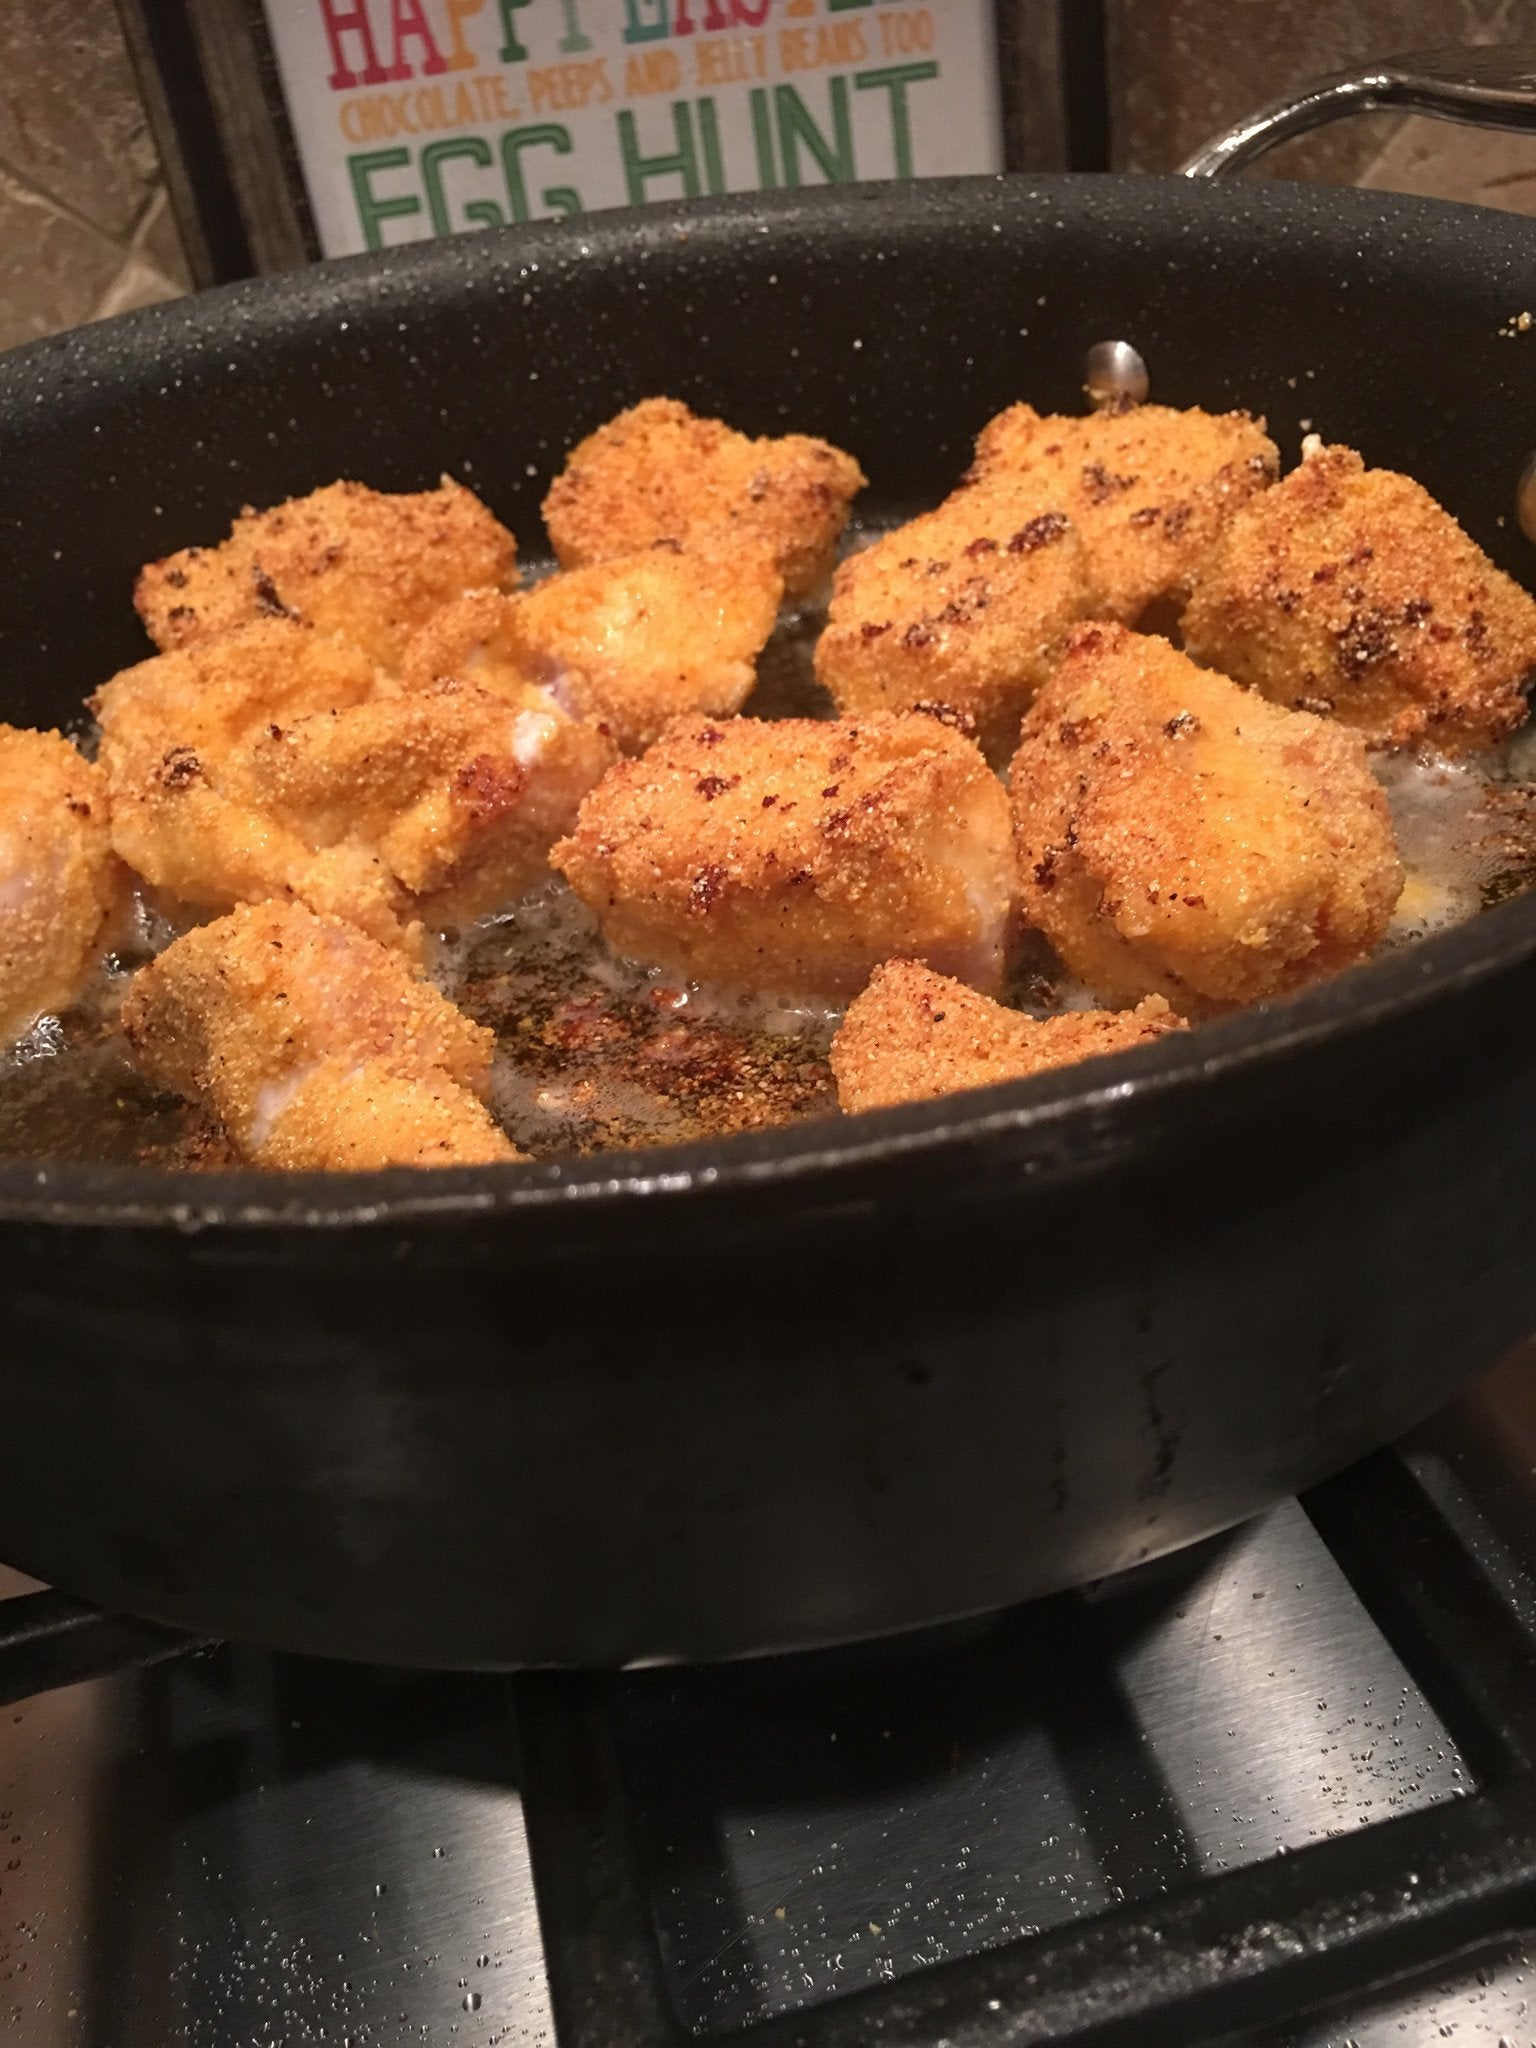 Fast "Mom Meal" with Mexi-Cajun fish fry